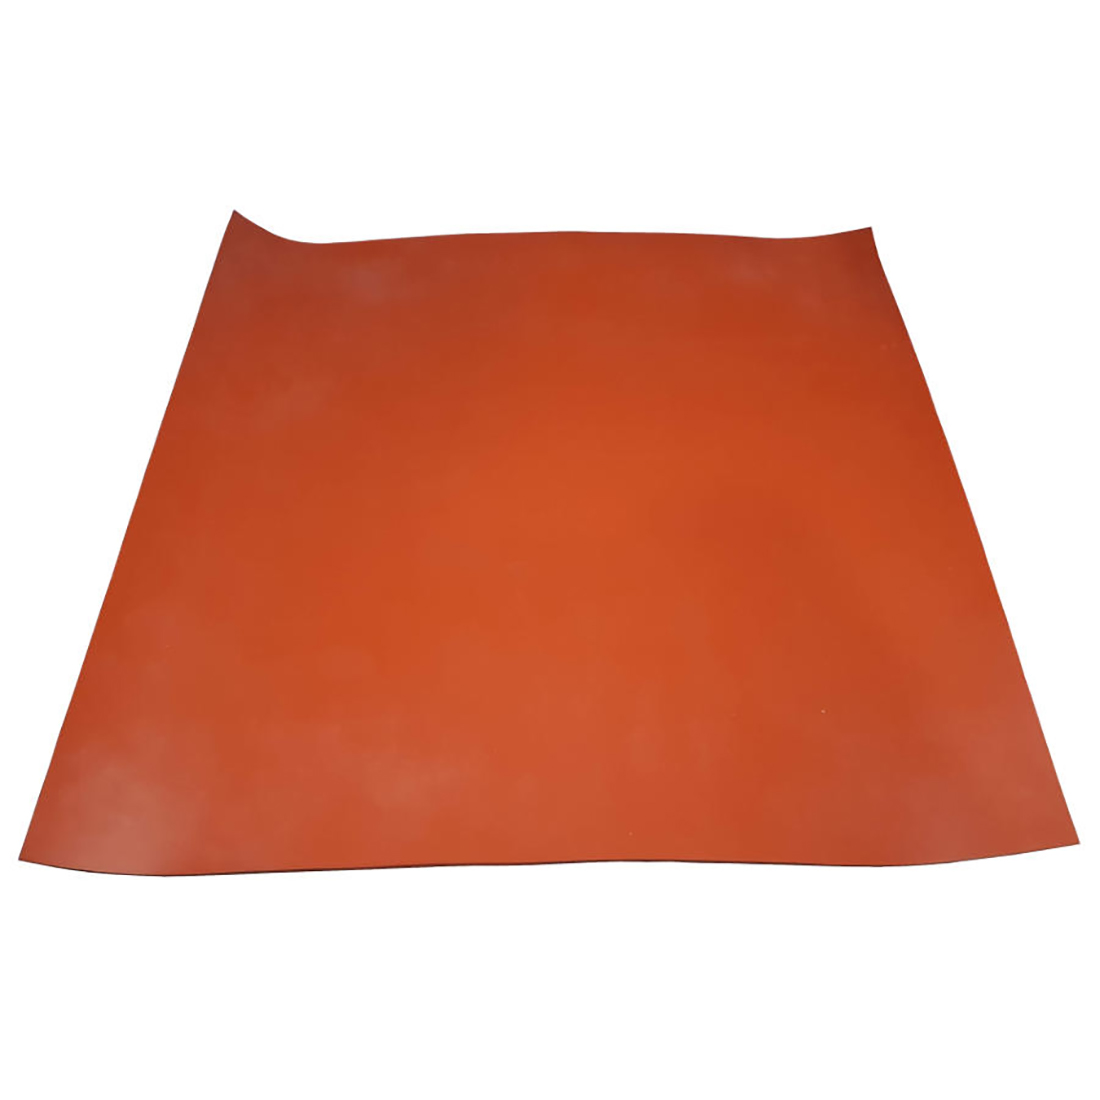 Red Silicone Rubber Pre-Cut Matts - Laying Flat